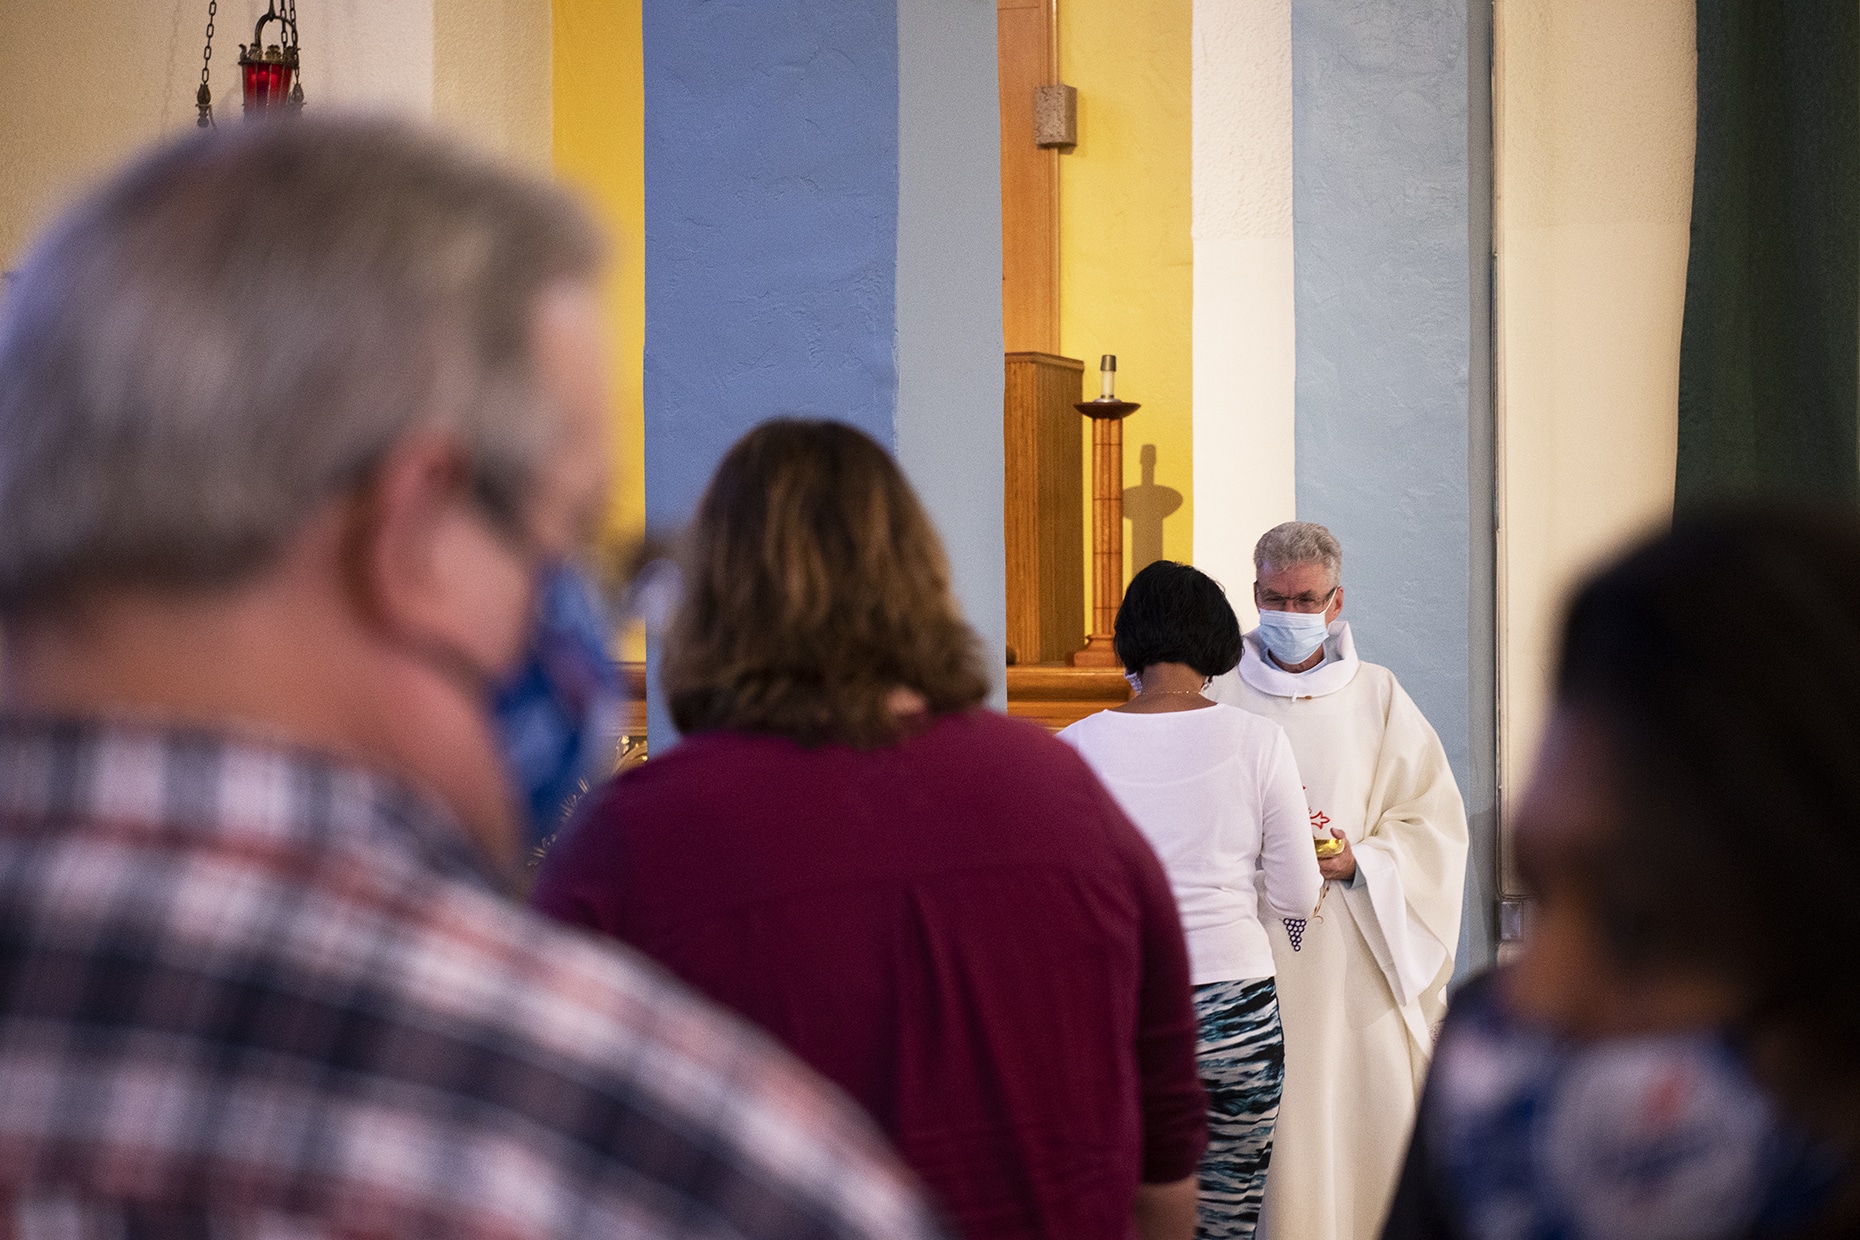 Parishioners attend their first Mass with COVID-19 safety measures